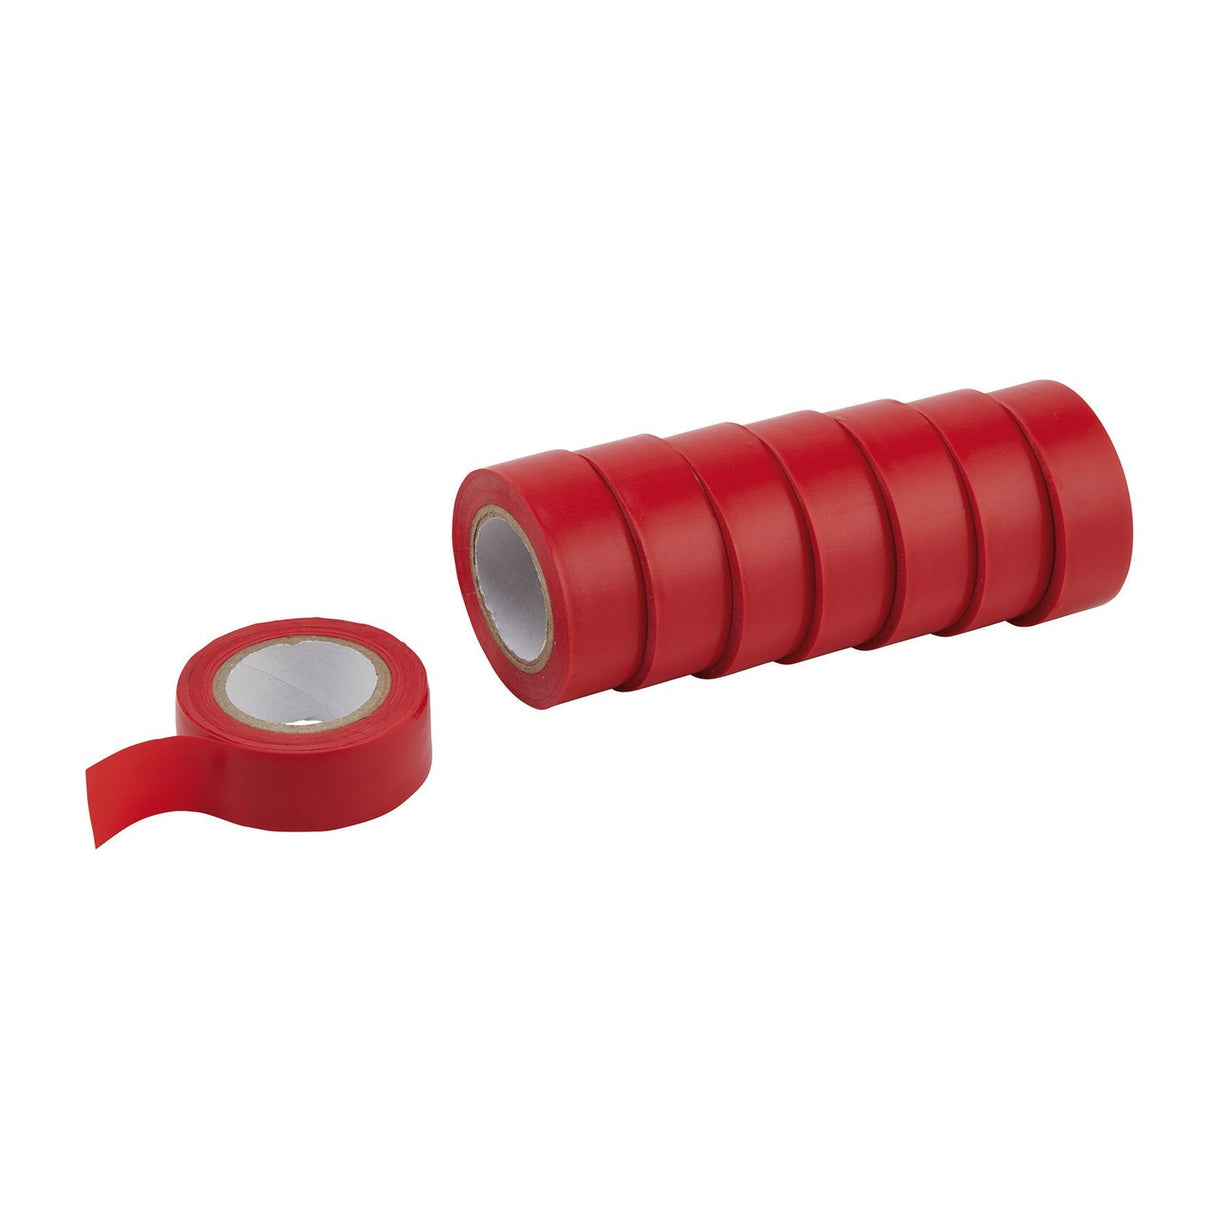 Draper Insulation Tape To Bsen60454/Type2, 10M X 19mm, Red (Pack Of 8) - 619 - Farming Parts